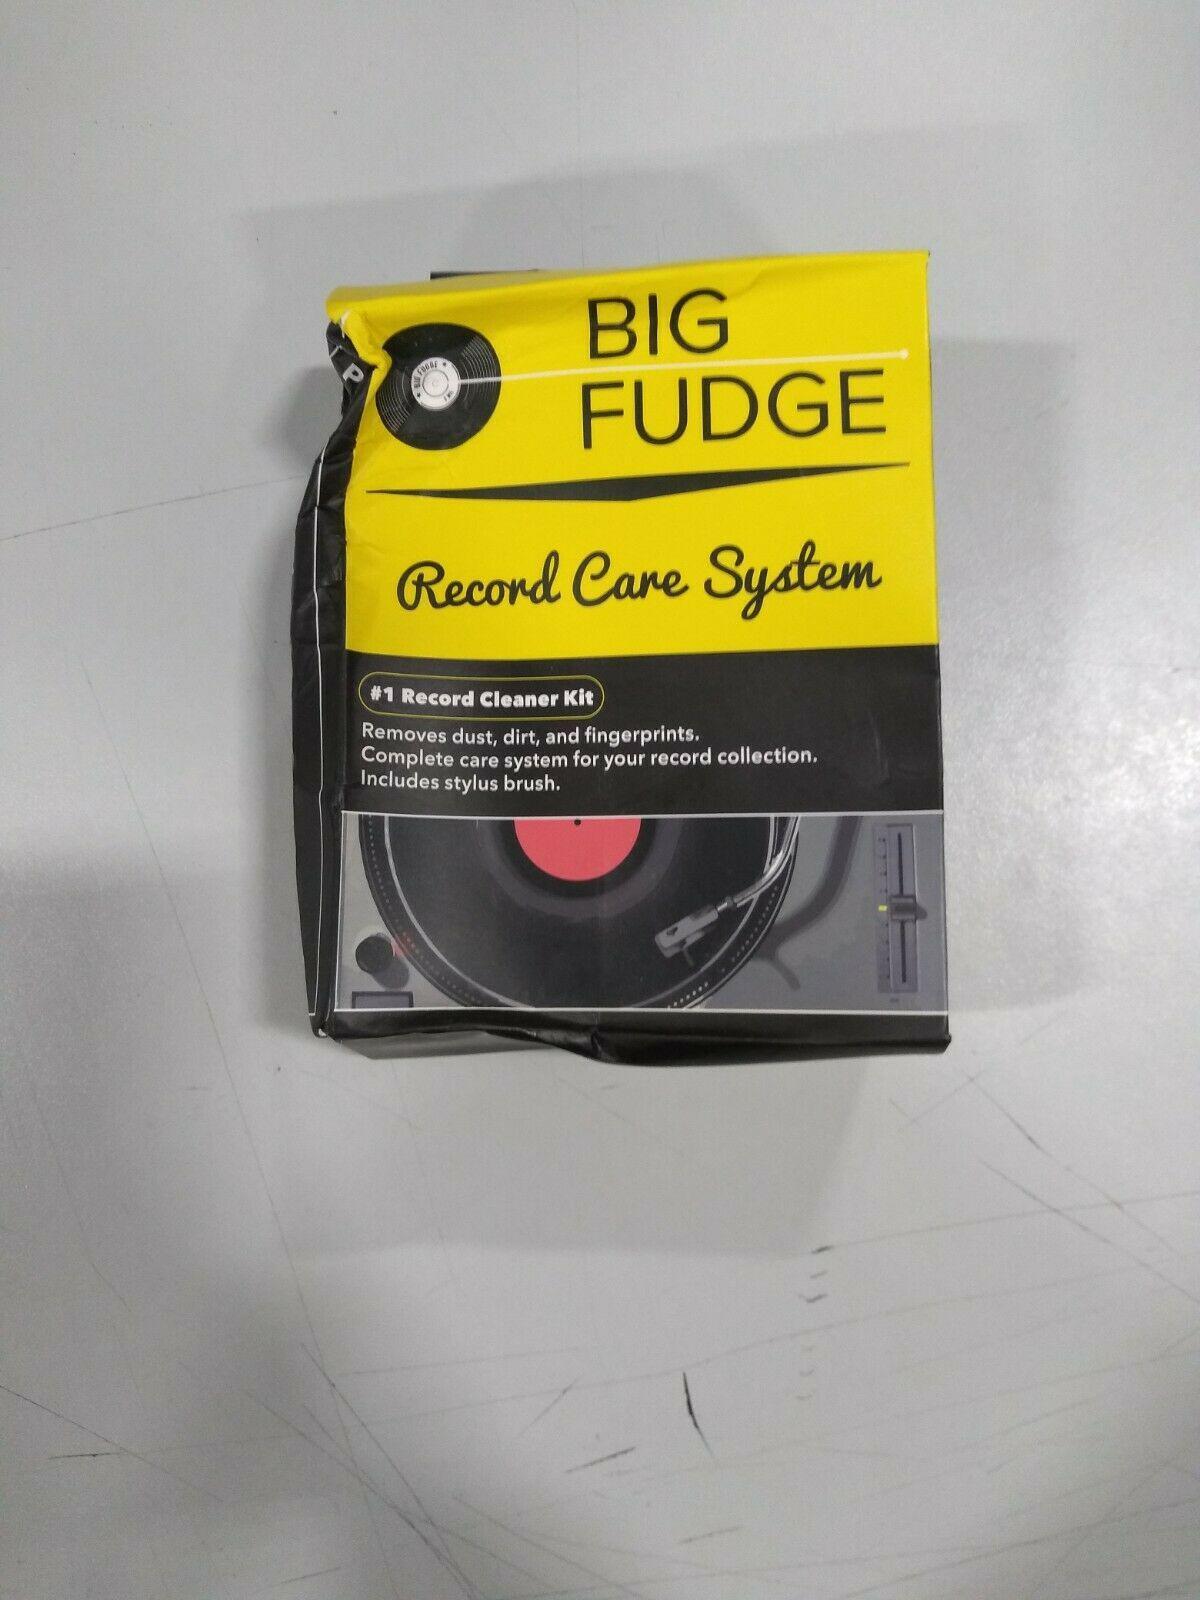 Big Fudge 4-in-1 Vinyl Record Care and Cleaning Kit